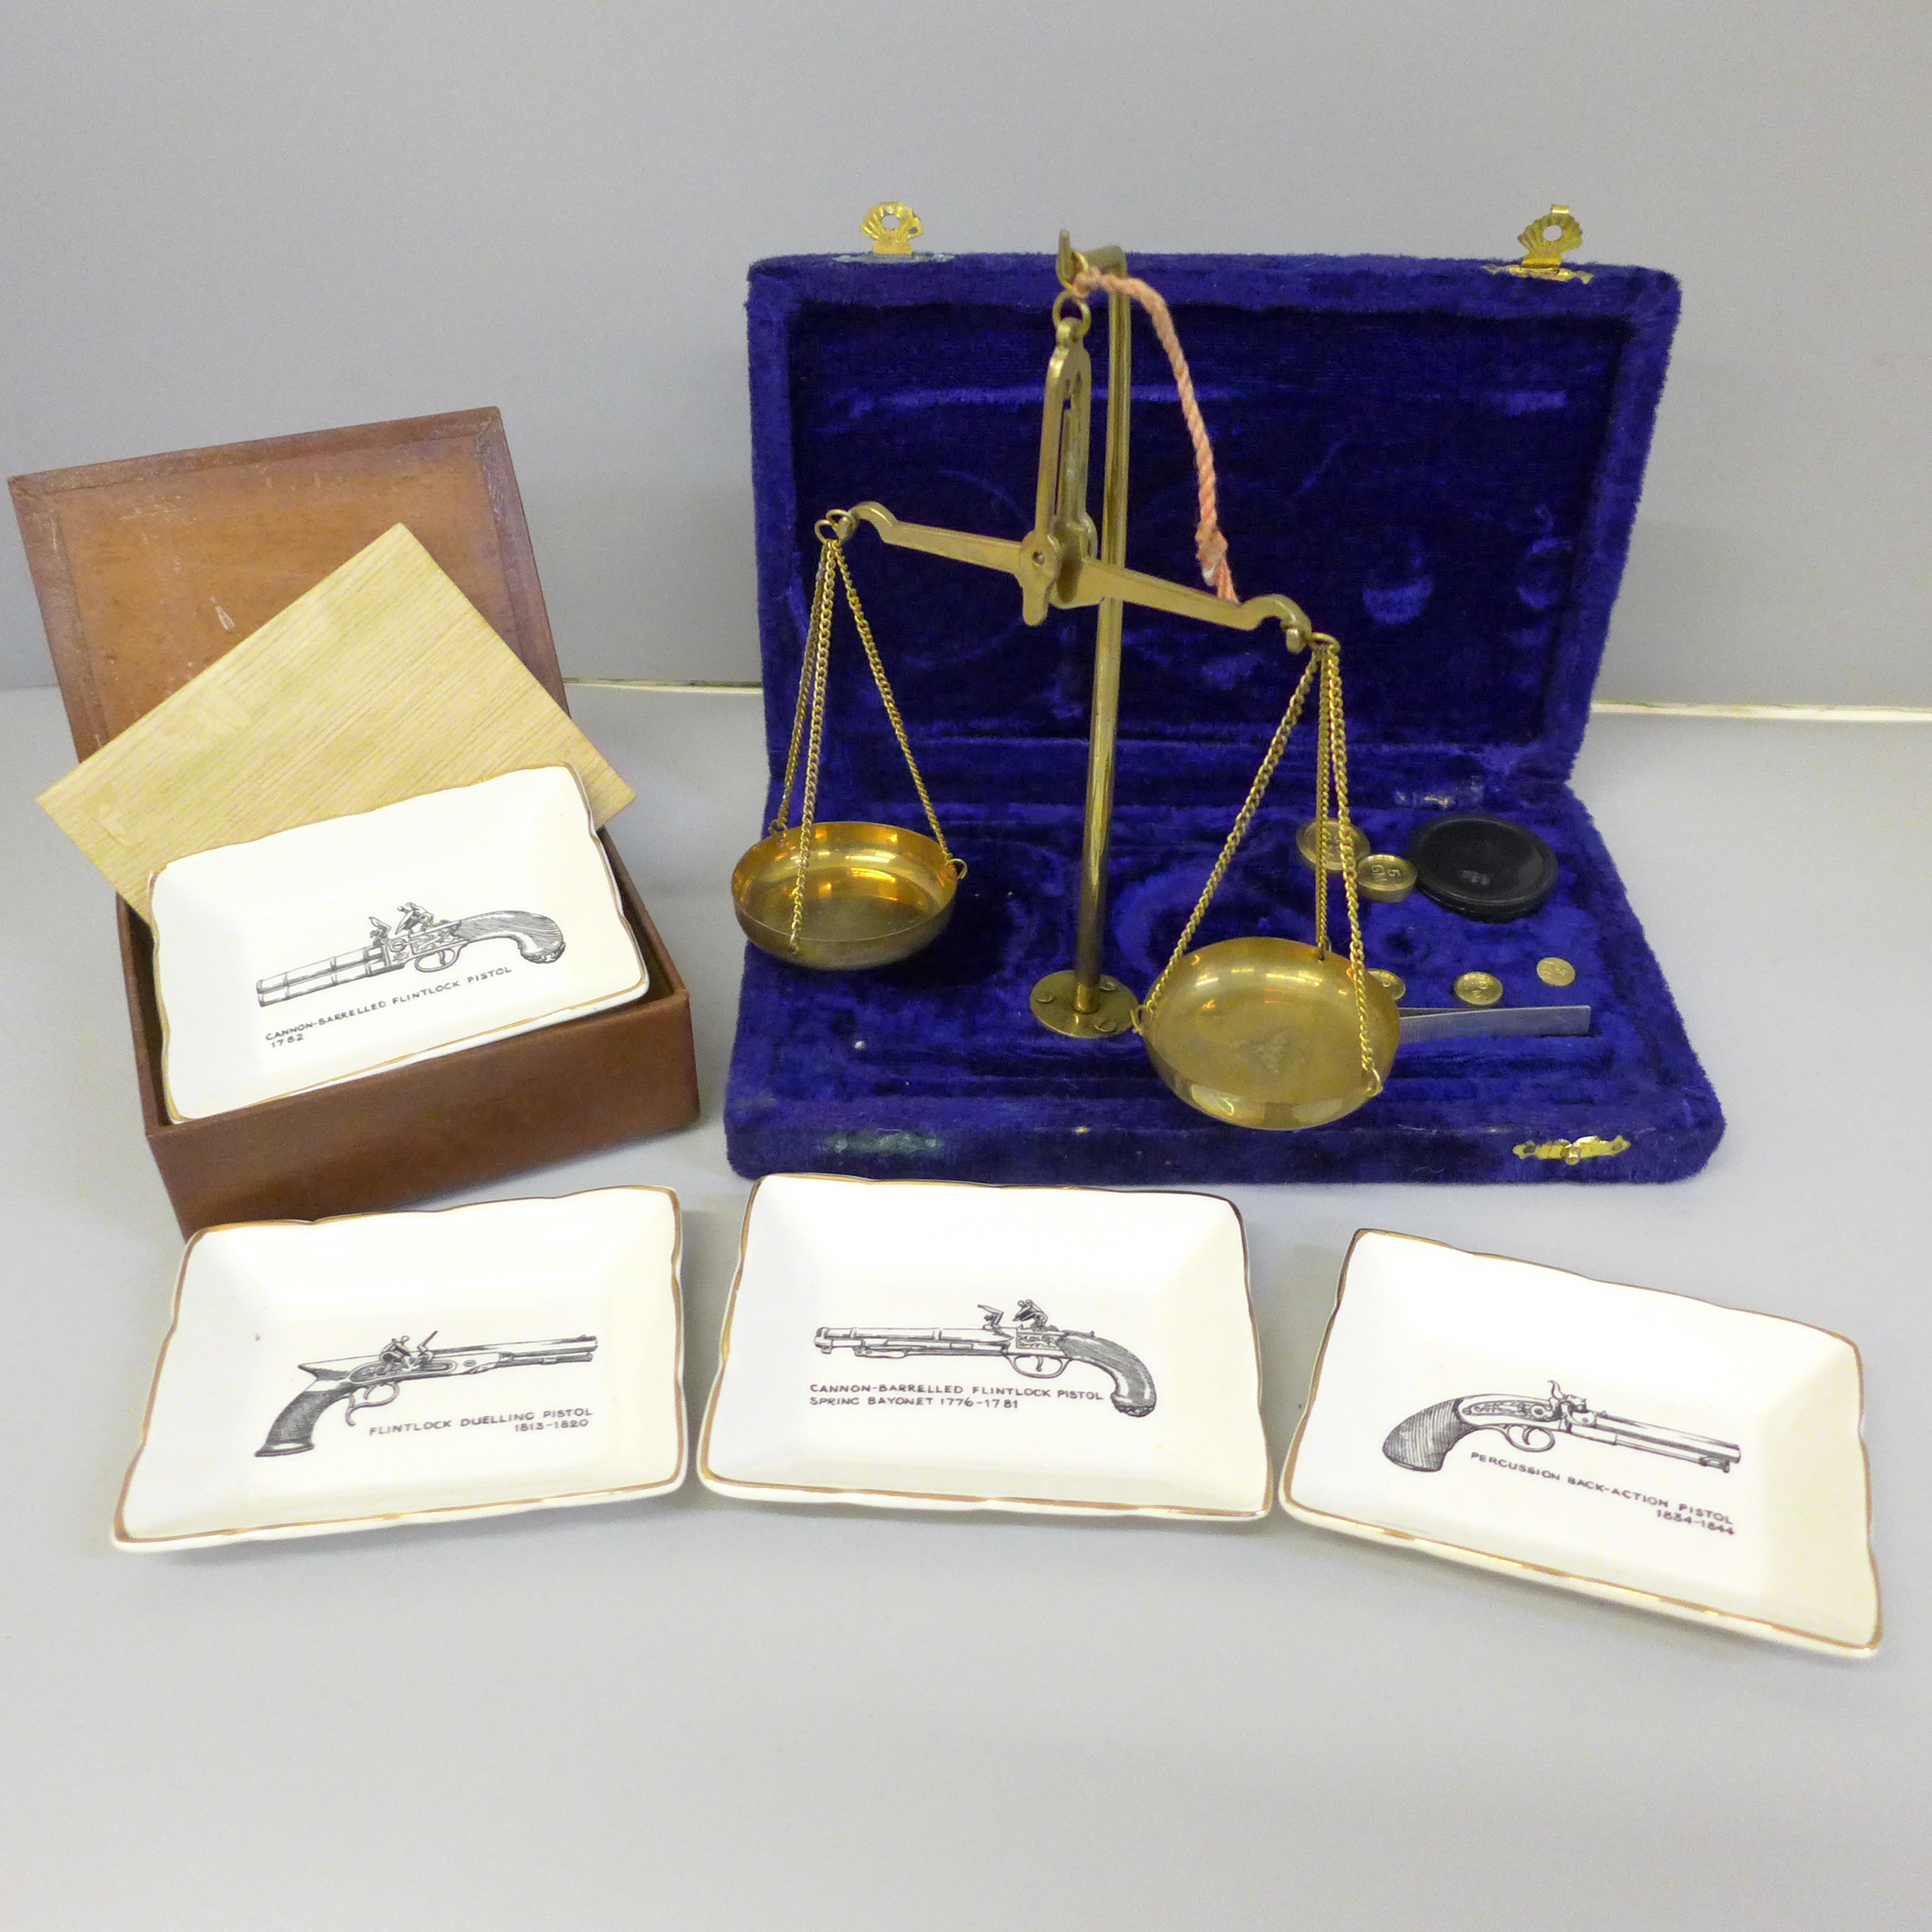 A small set of brass balance scales and a set of Sandland ware pistol trinket dishes, boxed